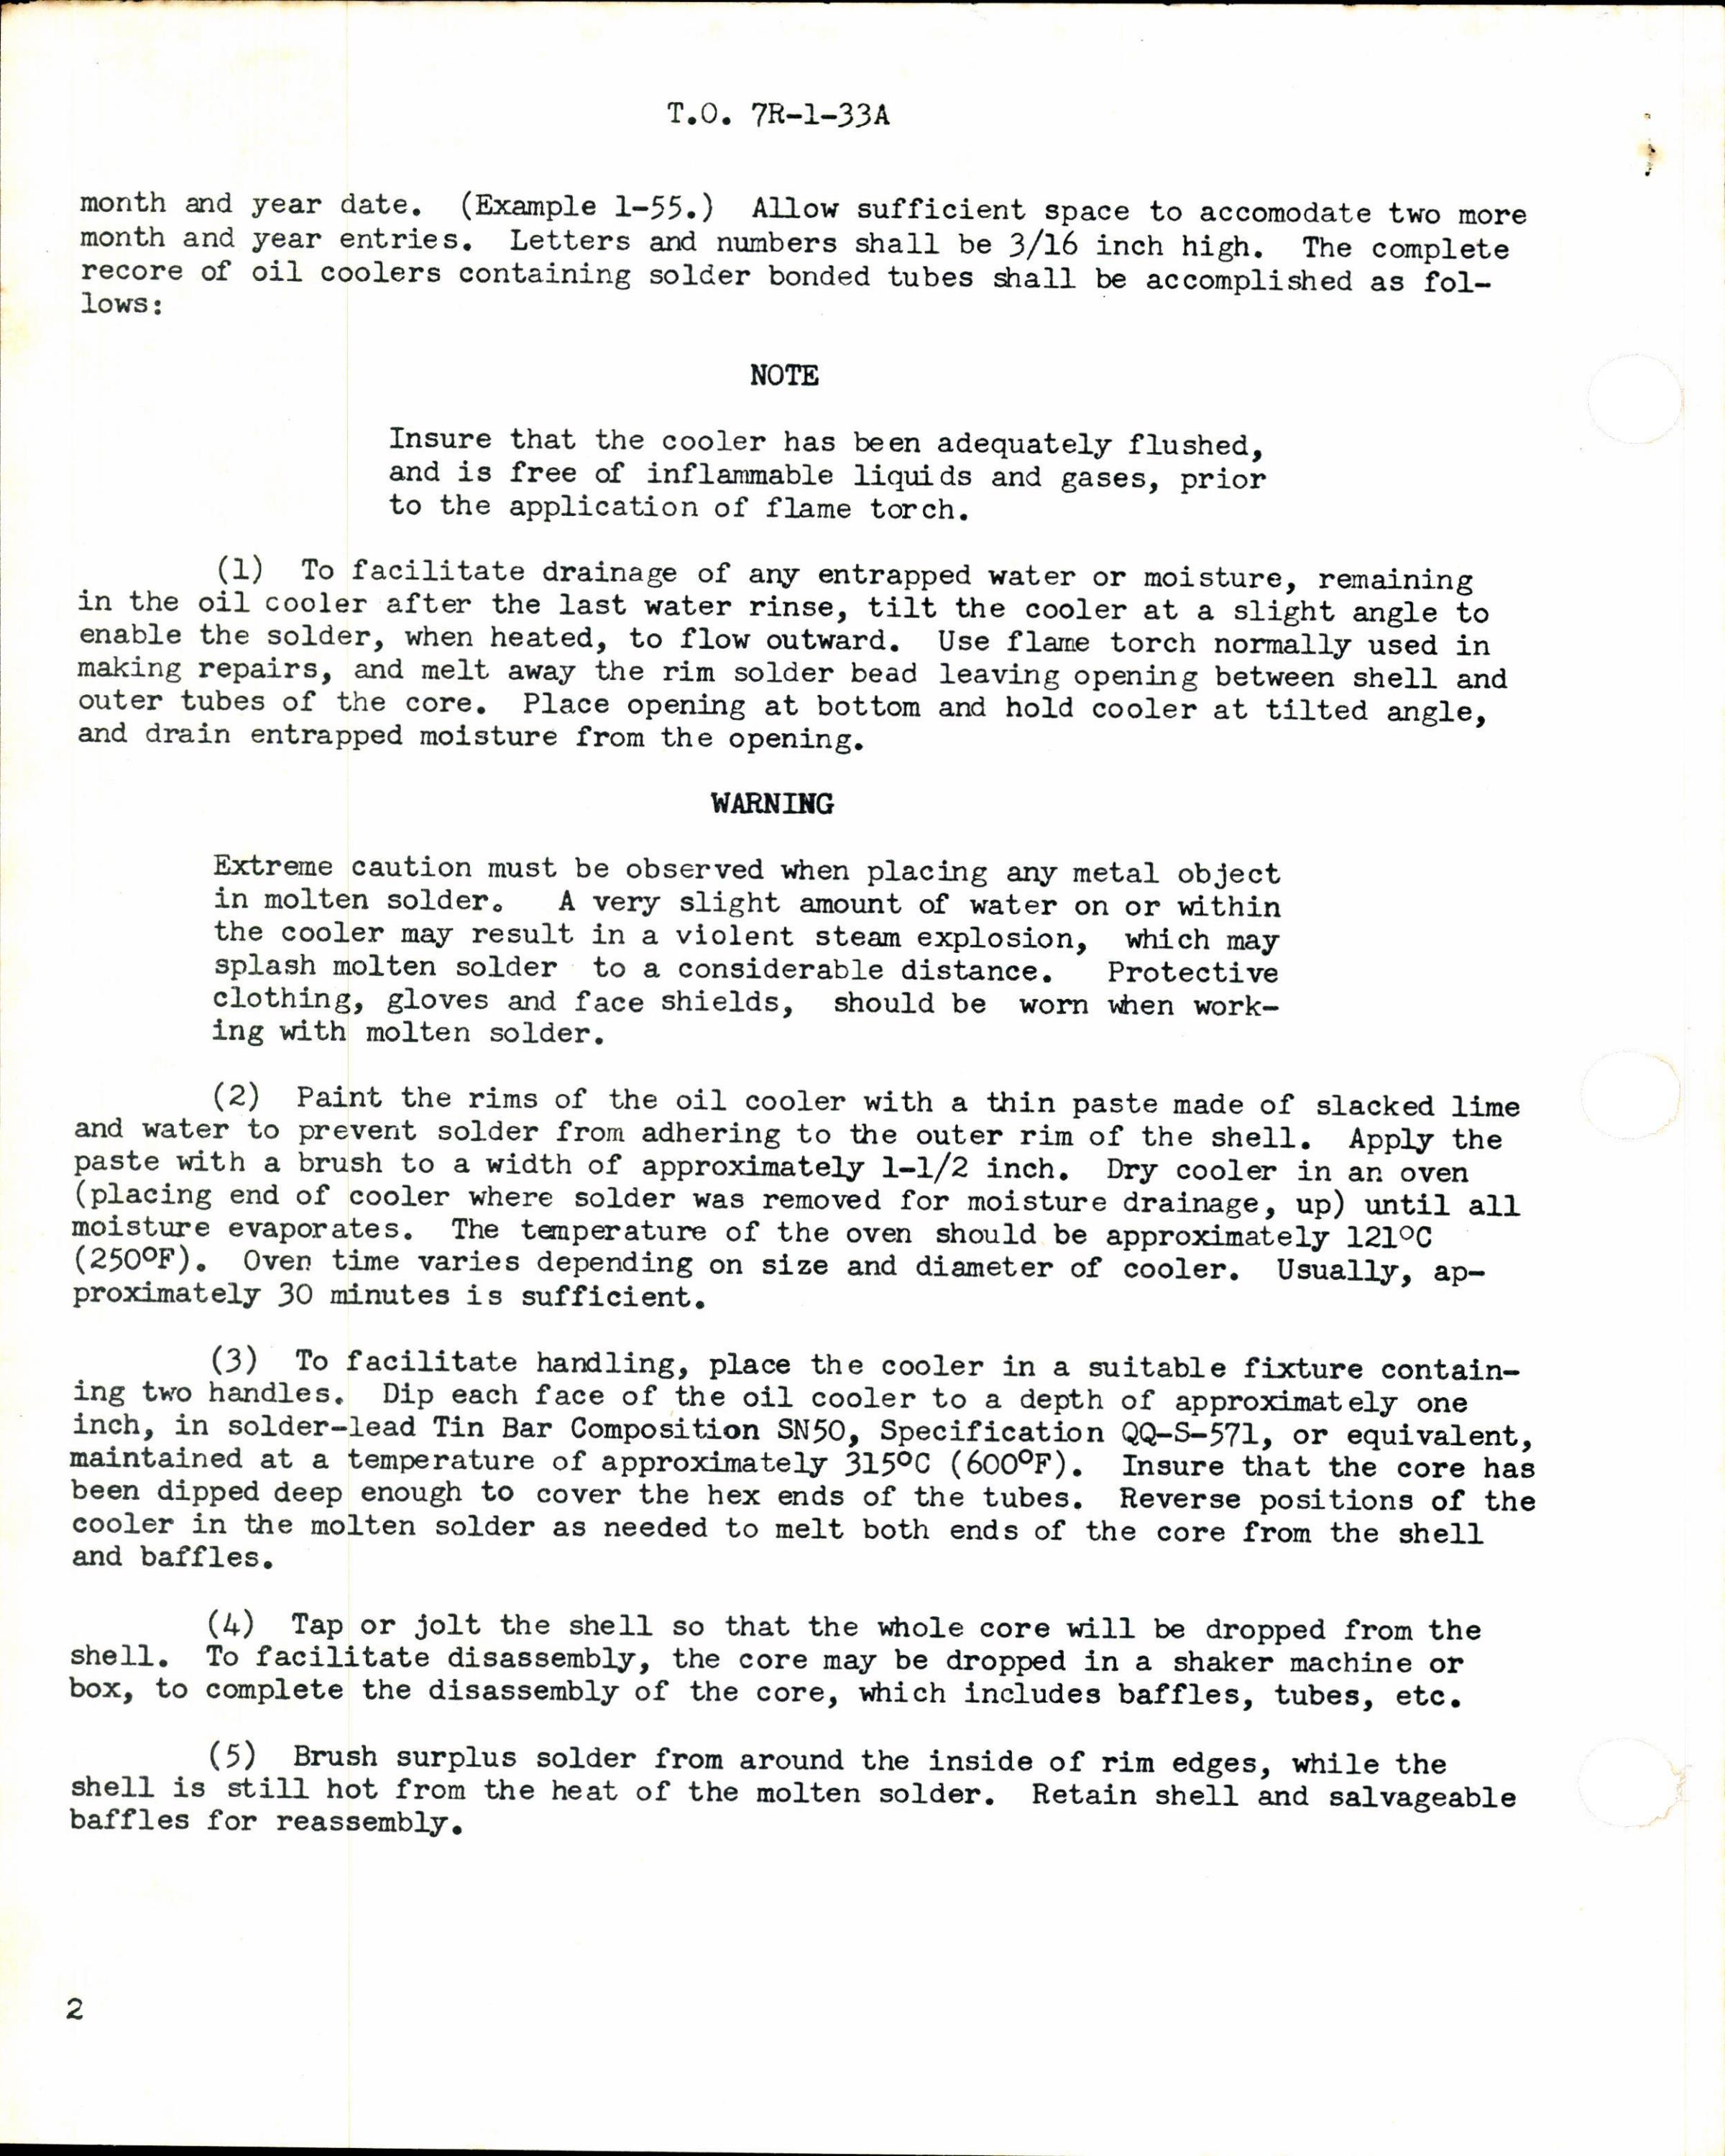 Sample page 2 from AirCorps Library document: Handbook Supplement Overhaul Instructions for Oil Coolers and Control Valves